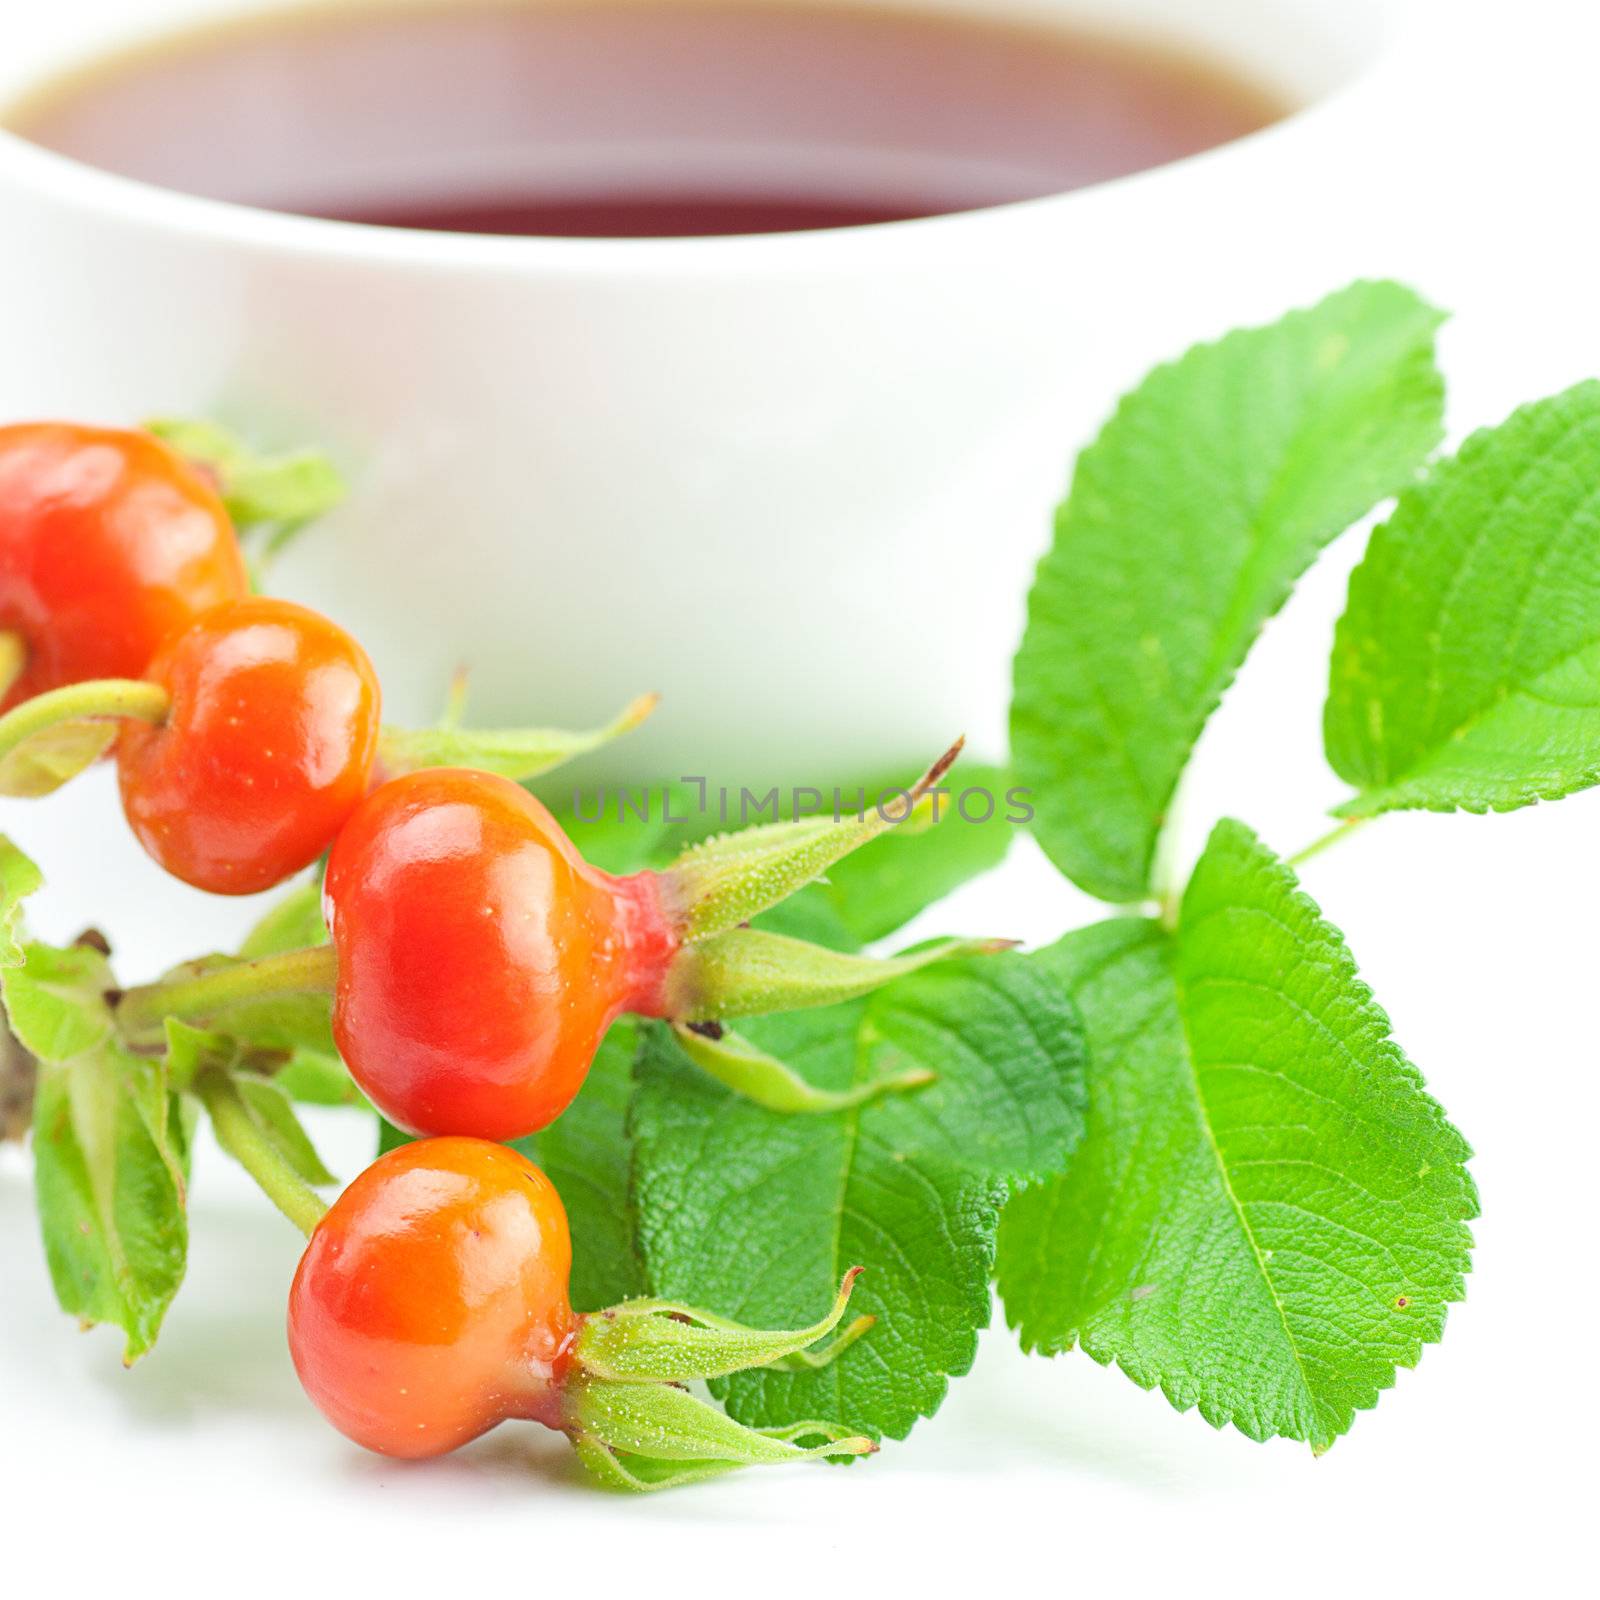 cup of tea and rosehip berries with leaves on white background by jannyjus